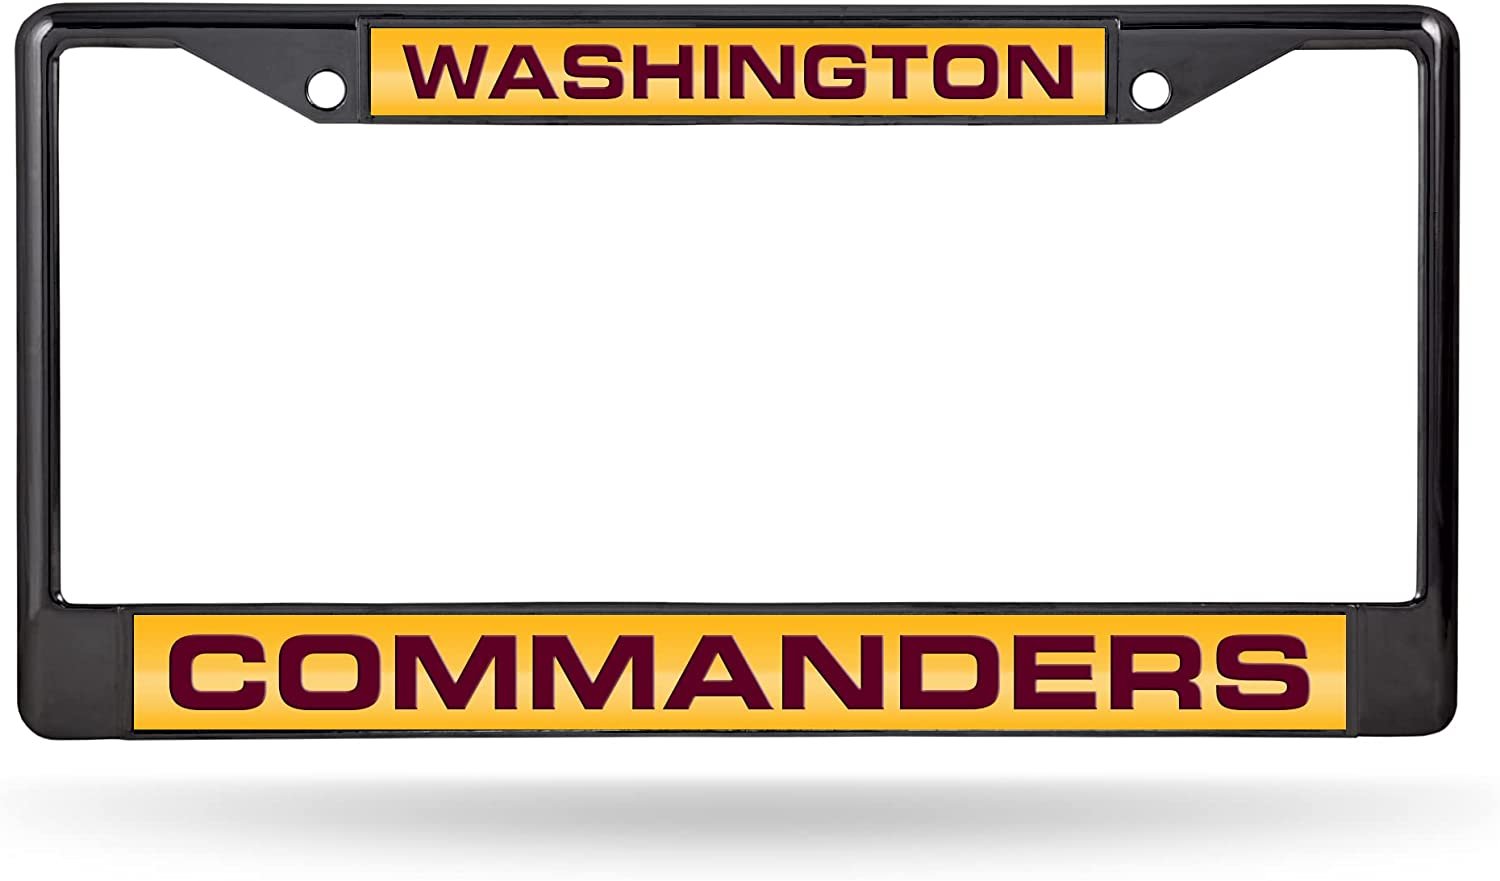 Washington Commanders Black Metal License Plate Frame Tag Cover, Laser Acrylic Mirrored Inserts, 12x6 Inch